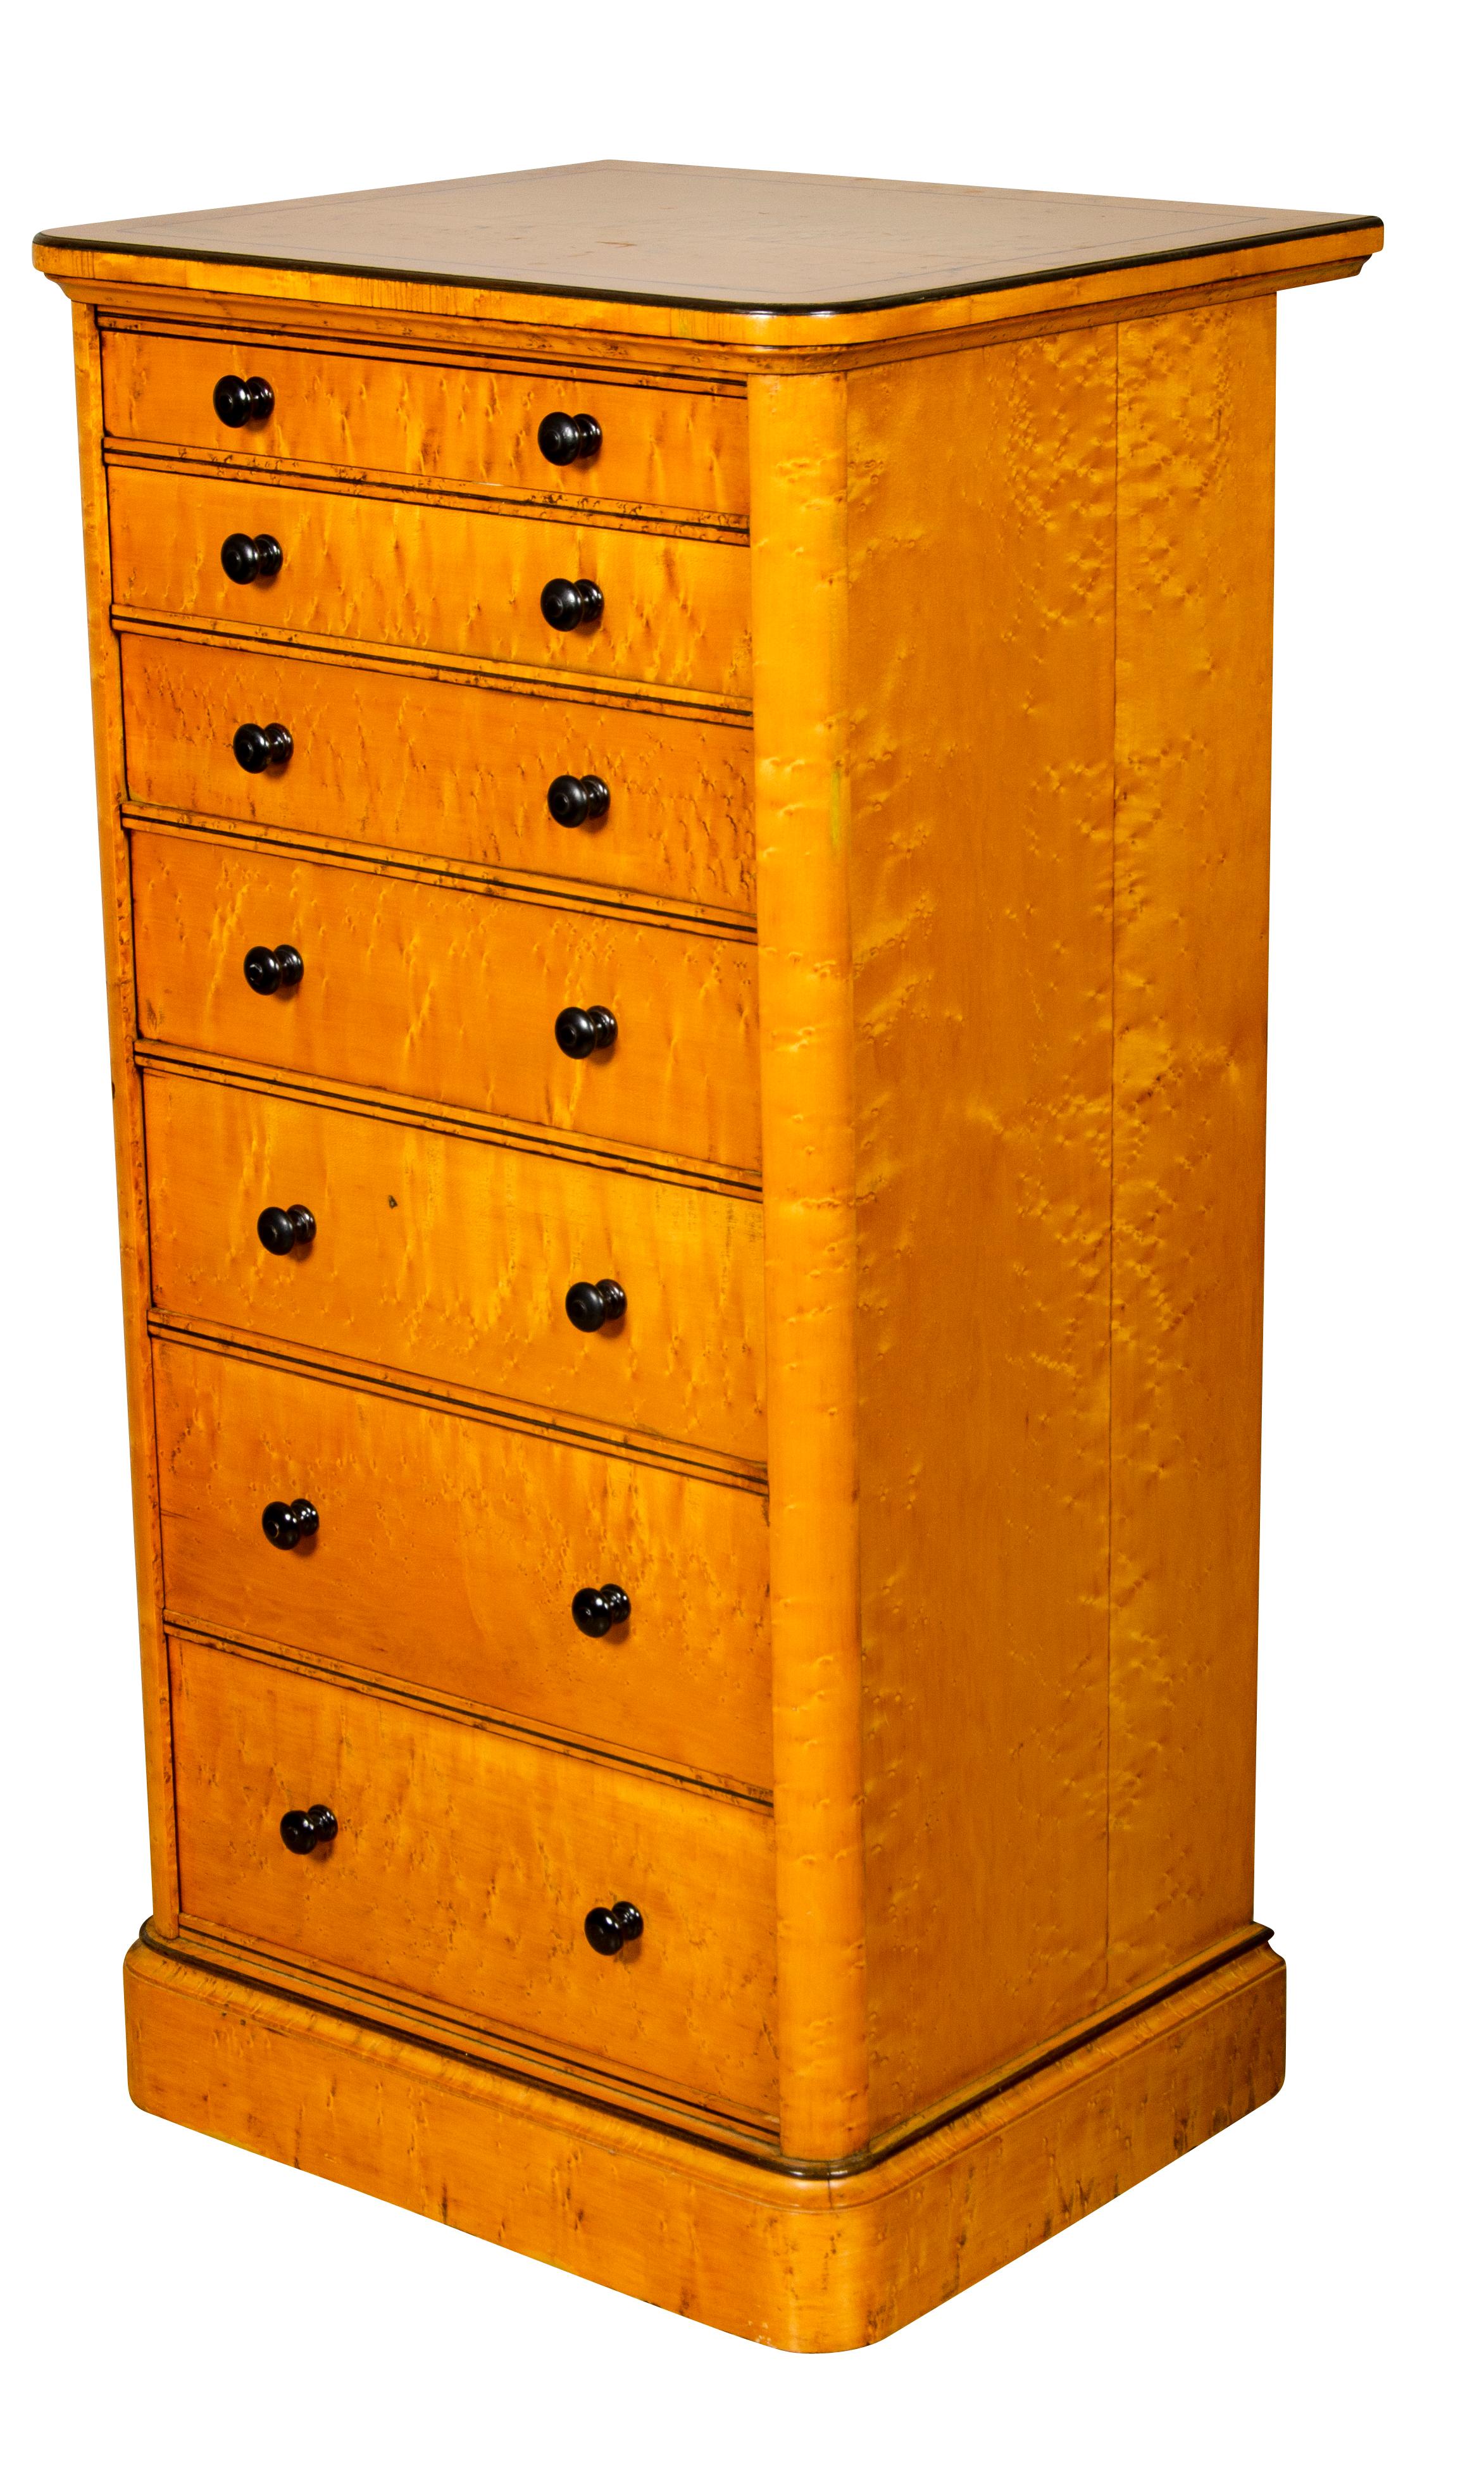 With squarish top with ebony stringing over seven graduated drawers with wood knobs and swinging lock mechanism which locks all drawers, raised on a plinth base. Holland & Sons was an important maker of furniture and rival of Gillows. Commissions